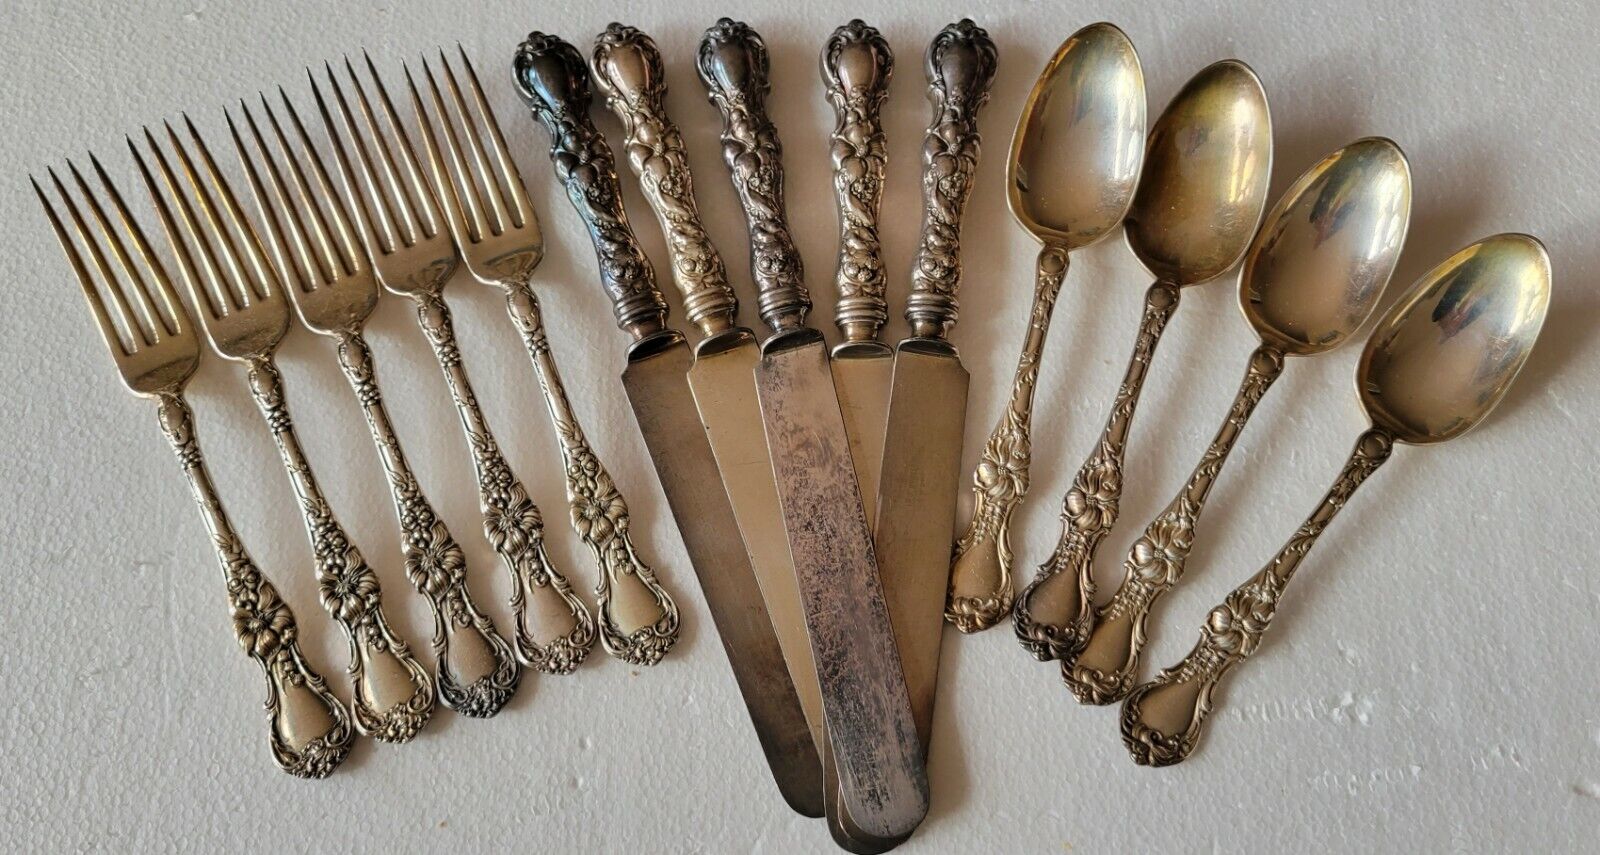 FLORAL Ornate Silverplate Flatware  16 PCS Wallace 1835 WT2allace 1835